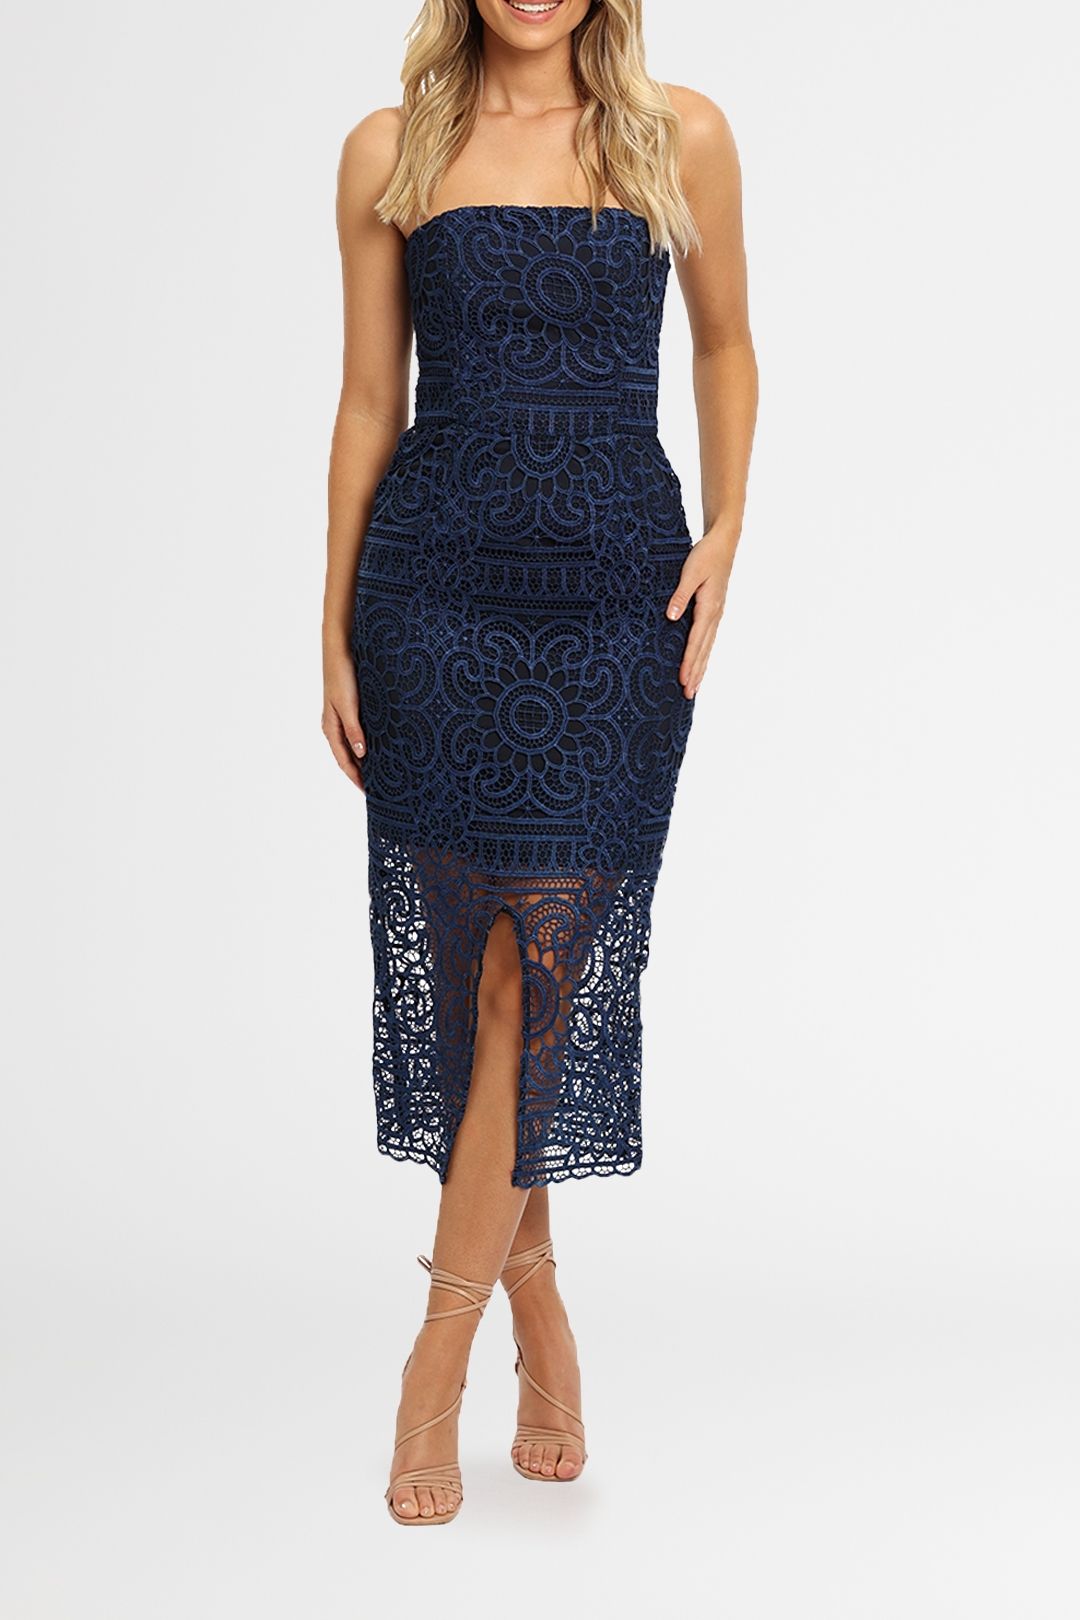 Nicholas Geo Lace Navy embroidered